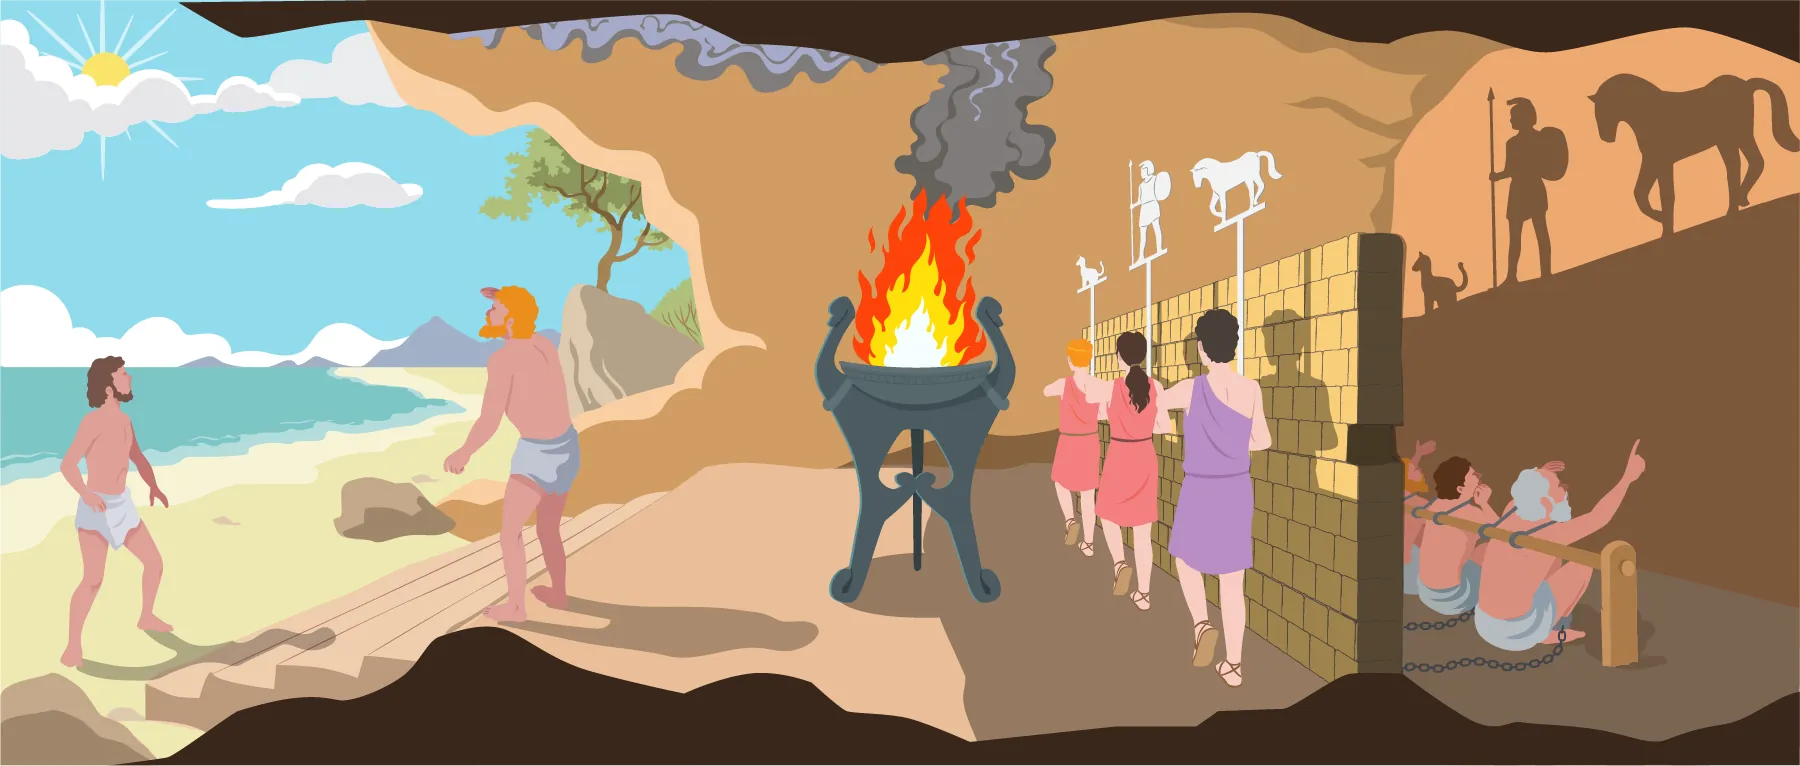 An illustration shows prisoners chained together behind a wall in a cave. Behind the wall is a fire, and between the fire and the wall are people carrying cutouts of a horse, a soldier, and a dog. The fire casts a large shadow of these images onto the wall near the prisoners.